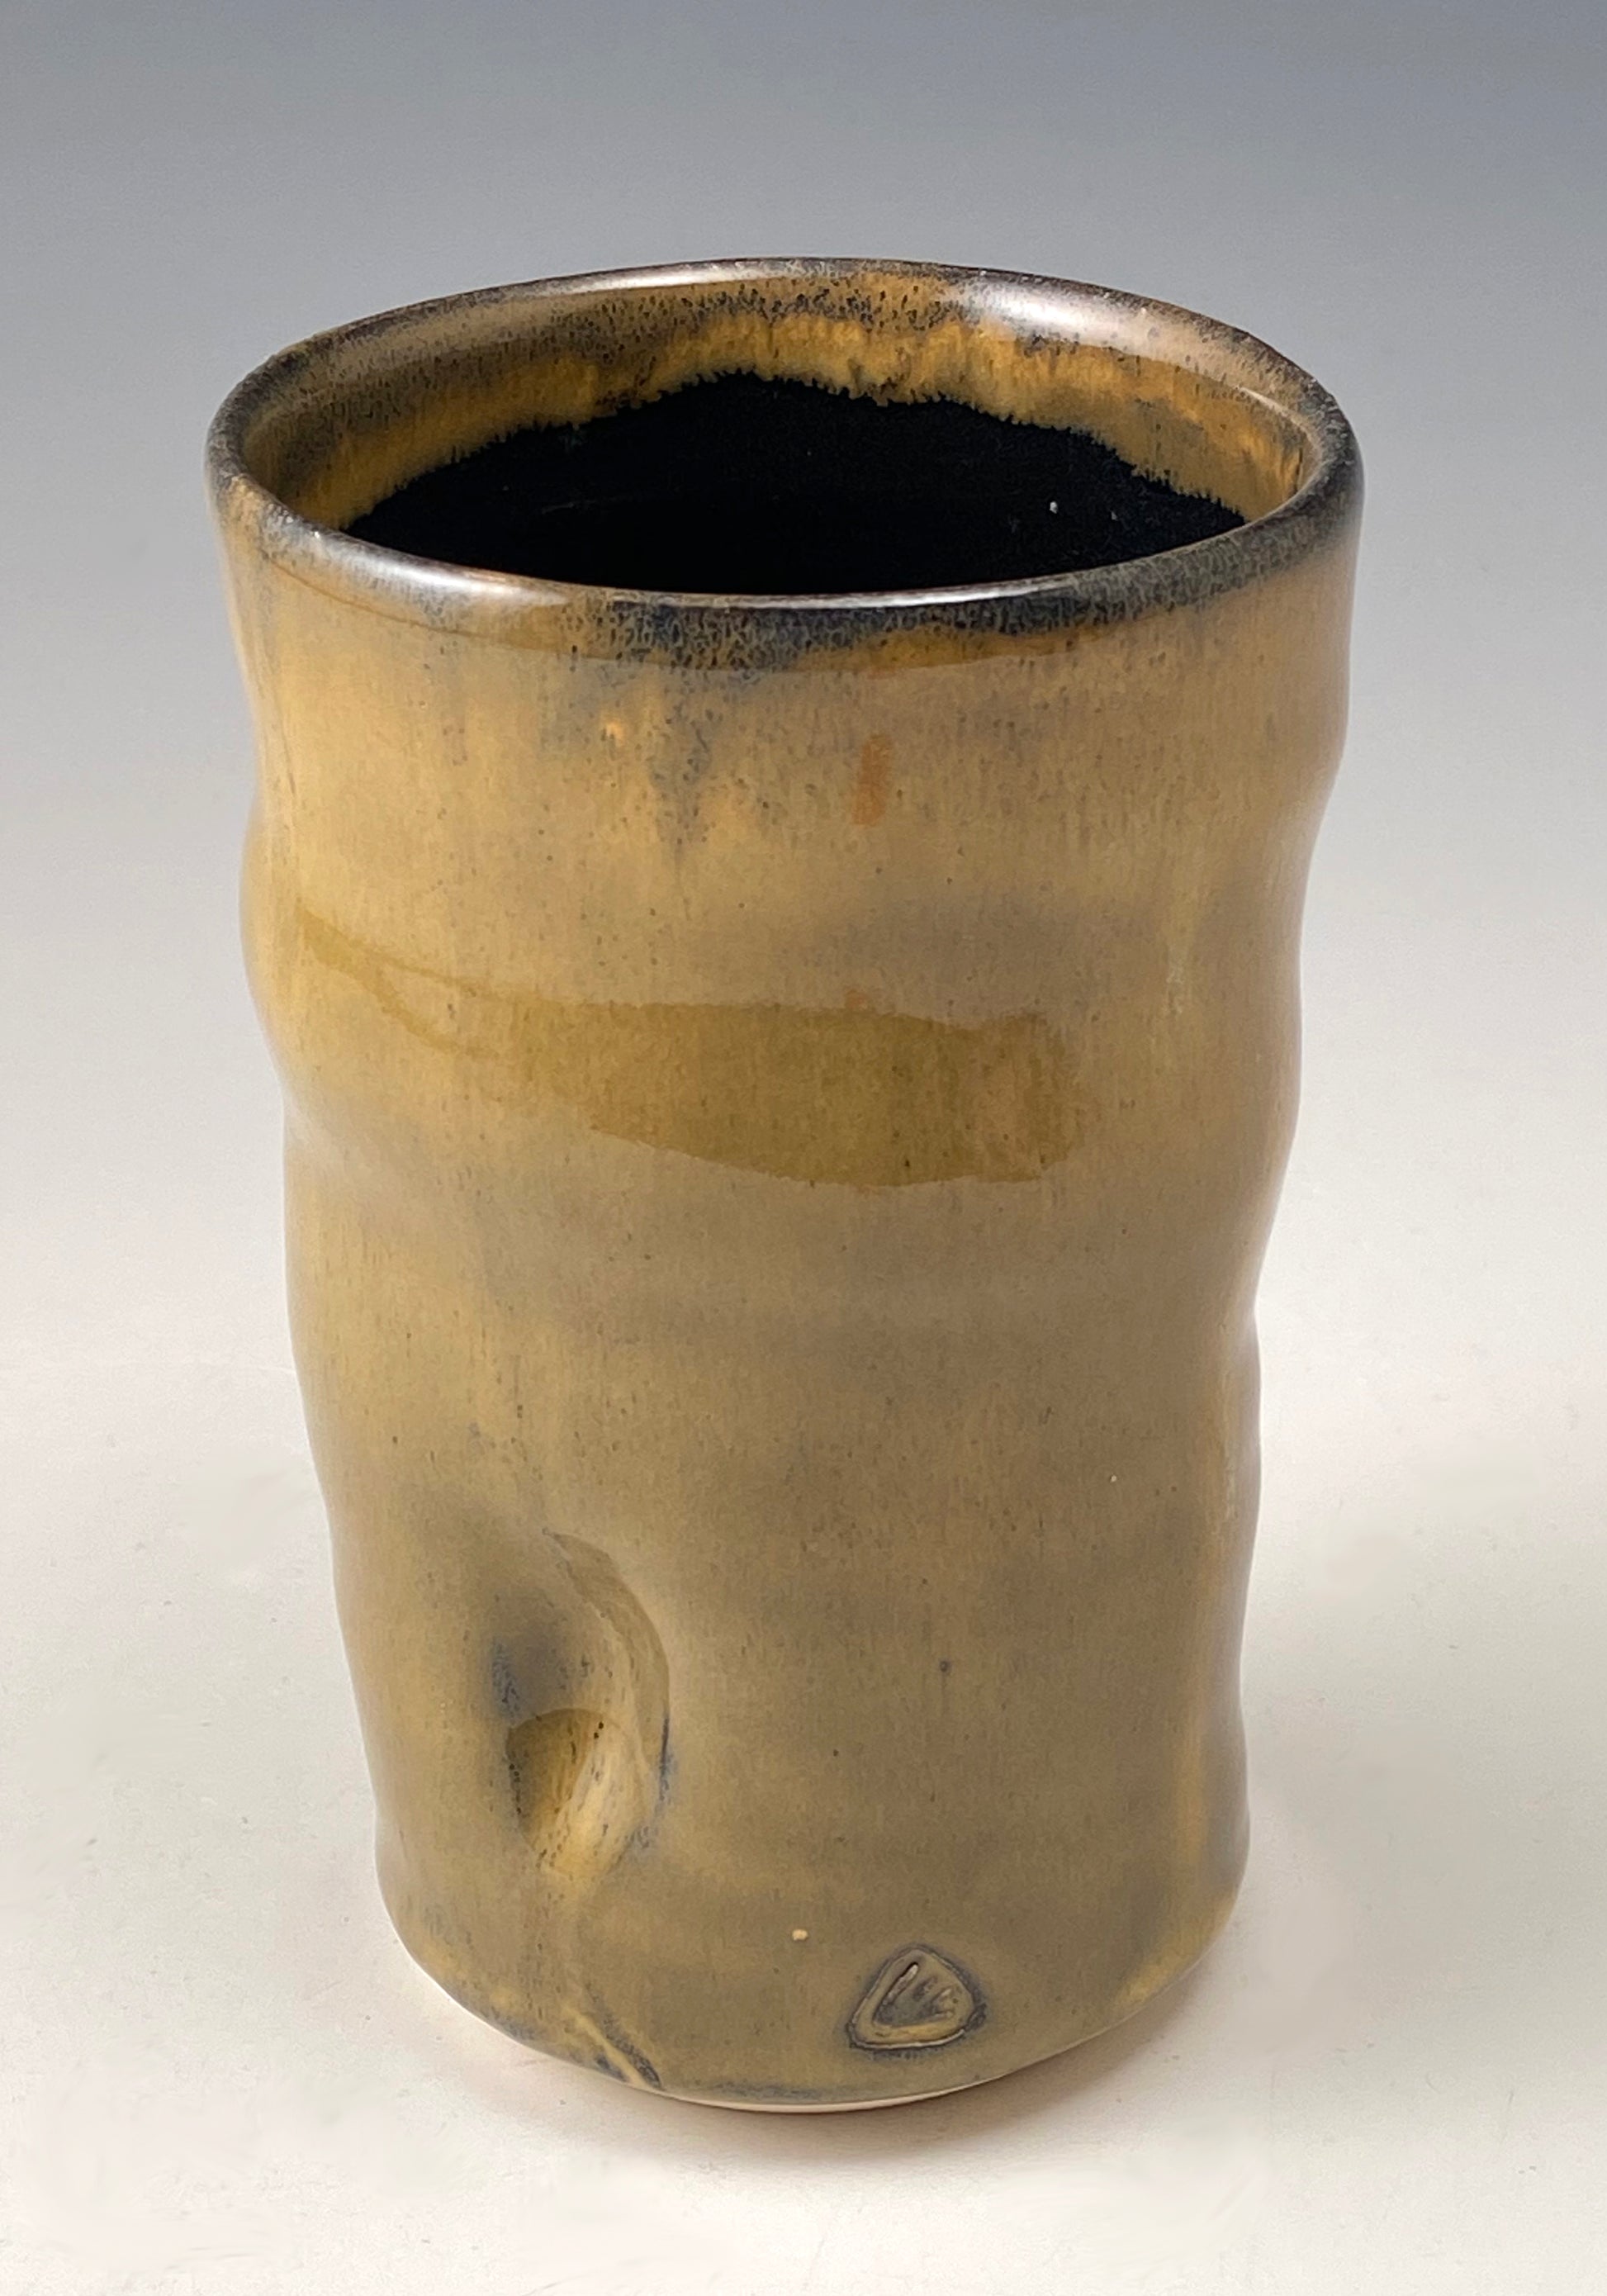 Handmade Pottery.  Stoneware cup with amber-colored glaze on exterior.  Black glaze on interior.